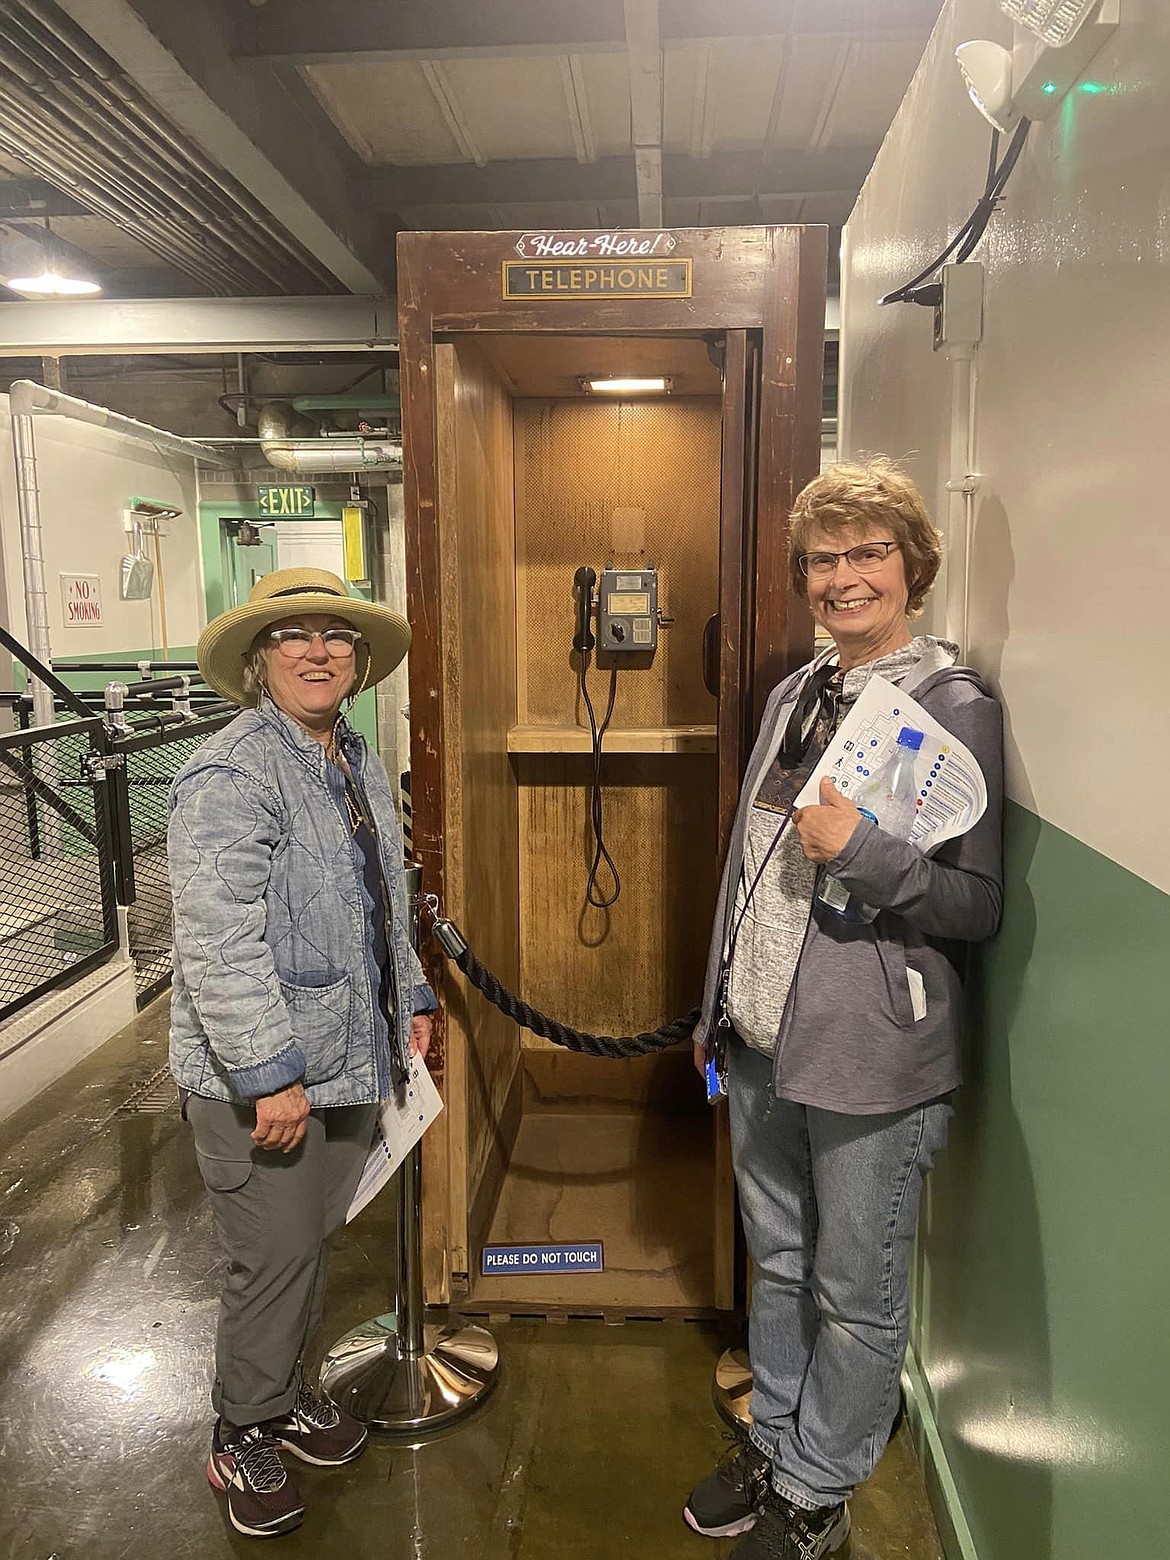 Quincy museum participants pose with an ancient artifact, a 1940s telephone, during a tour of the Hanford nuclear site in 2023.